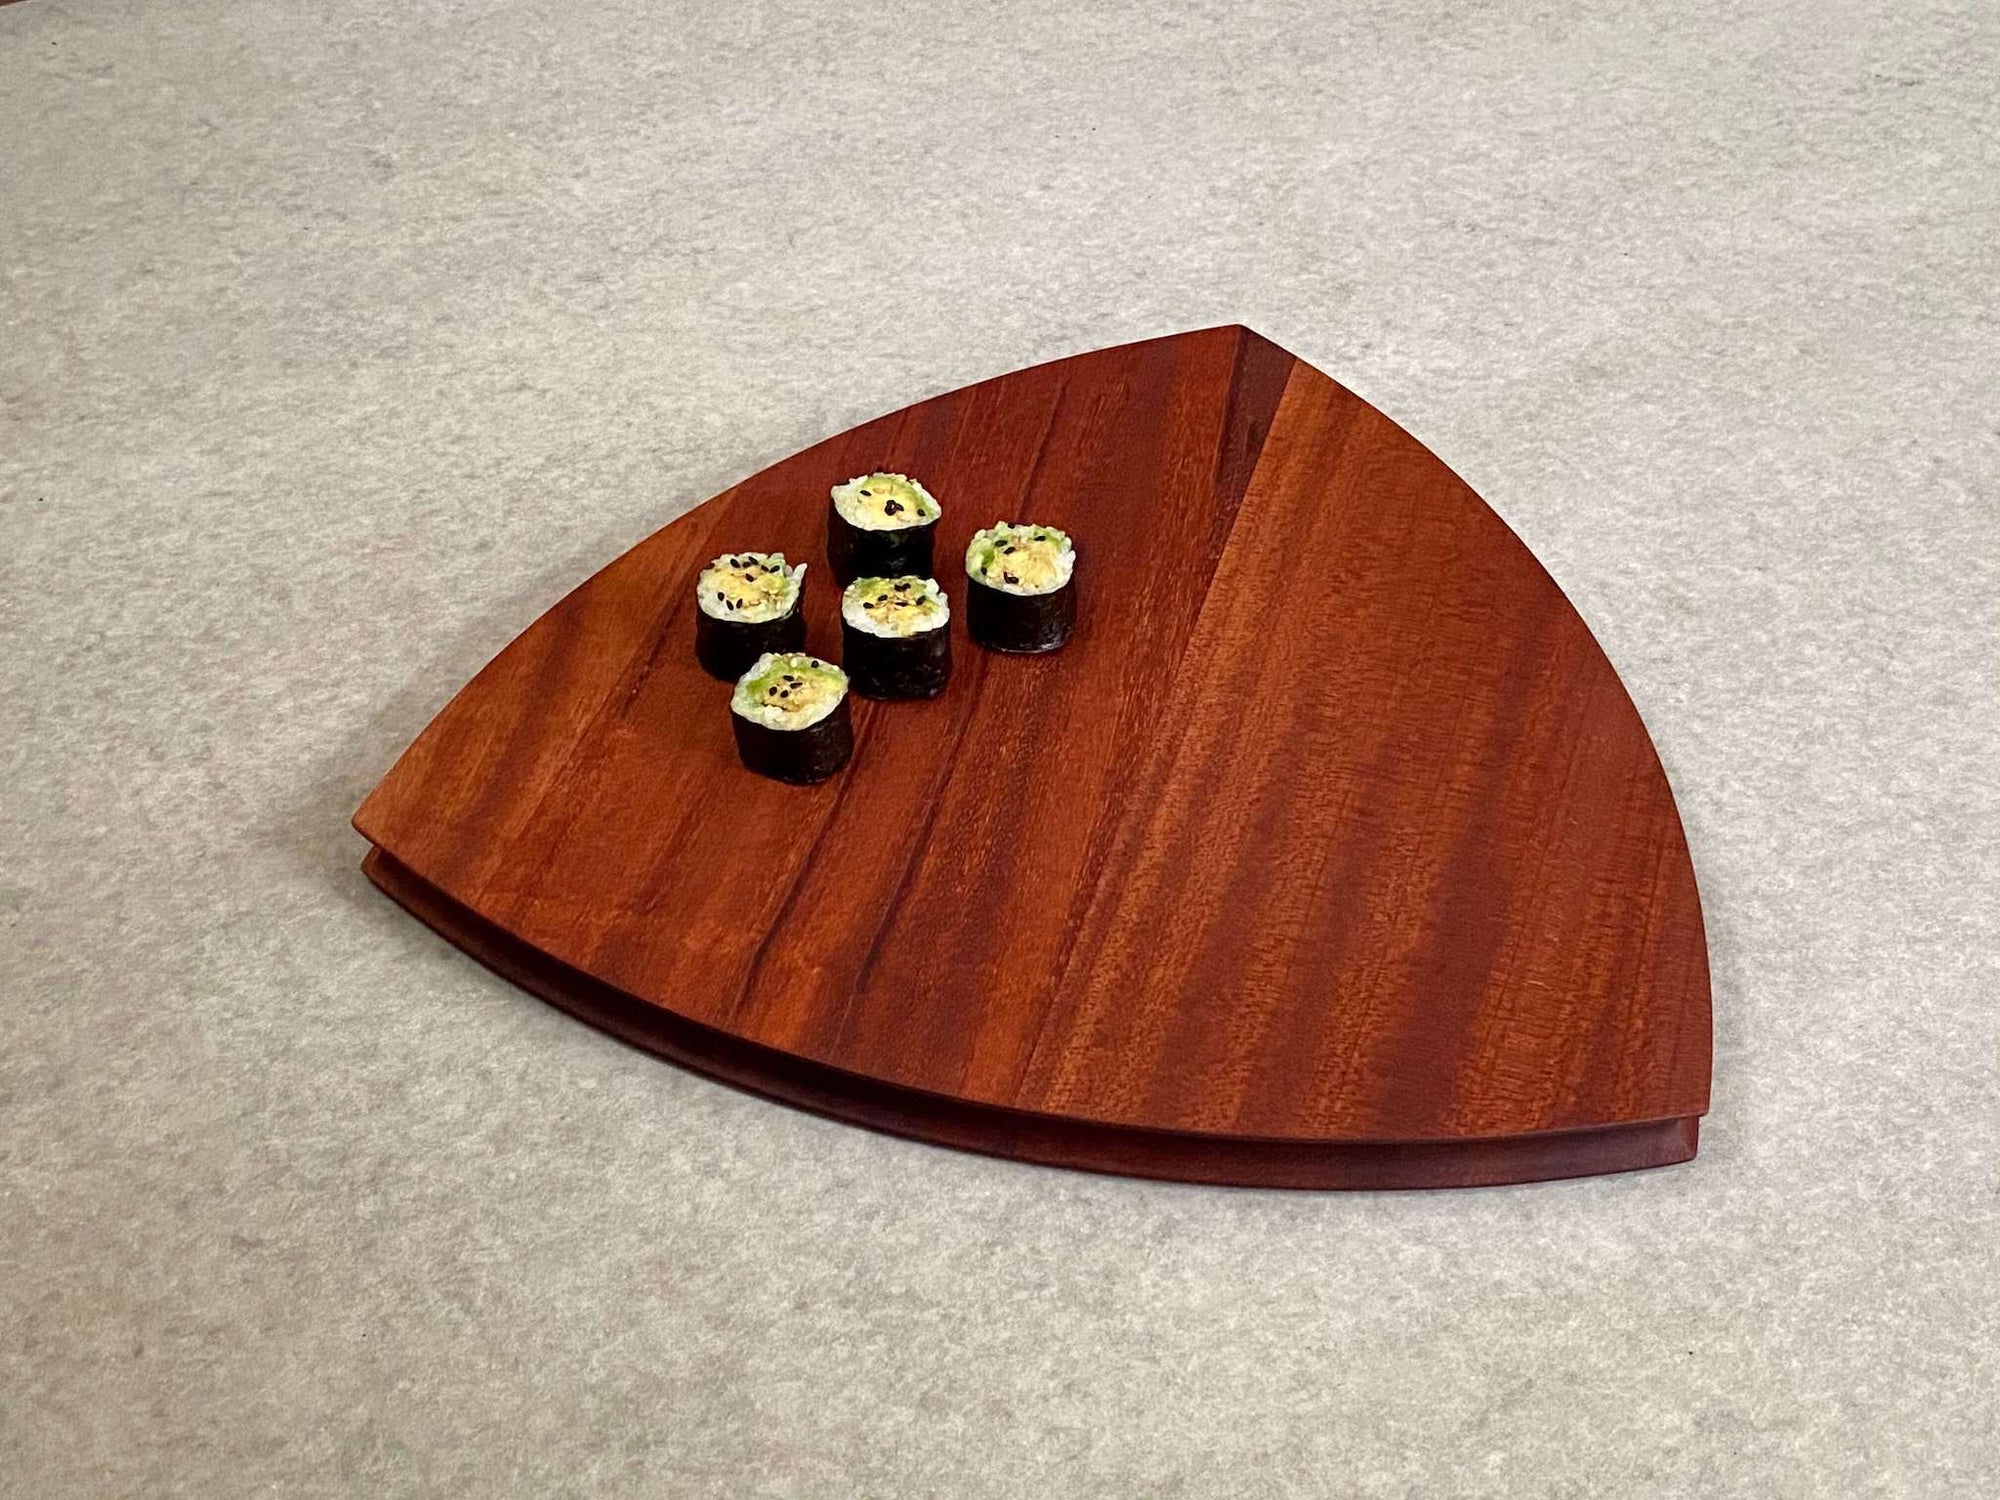 A rounded triangular shaped cutting and serving board in mahogany. Sculpted edges provide a nice detail.